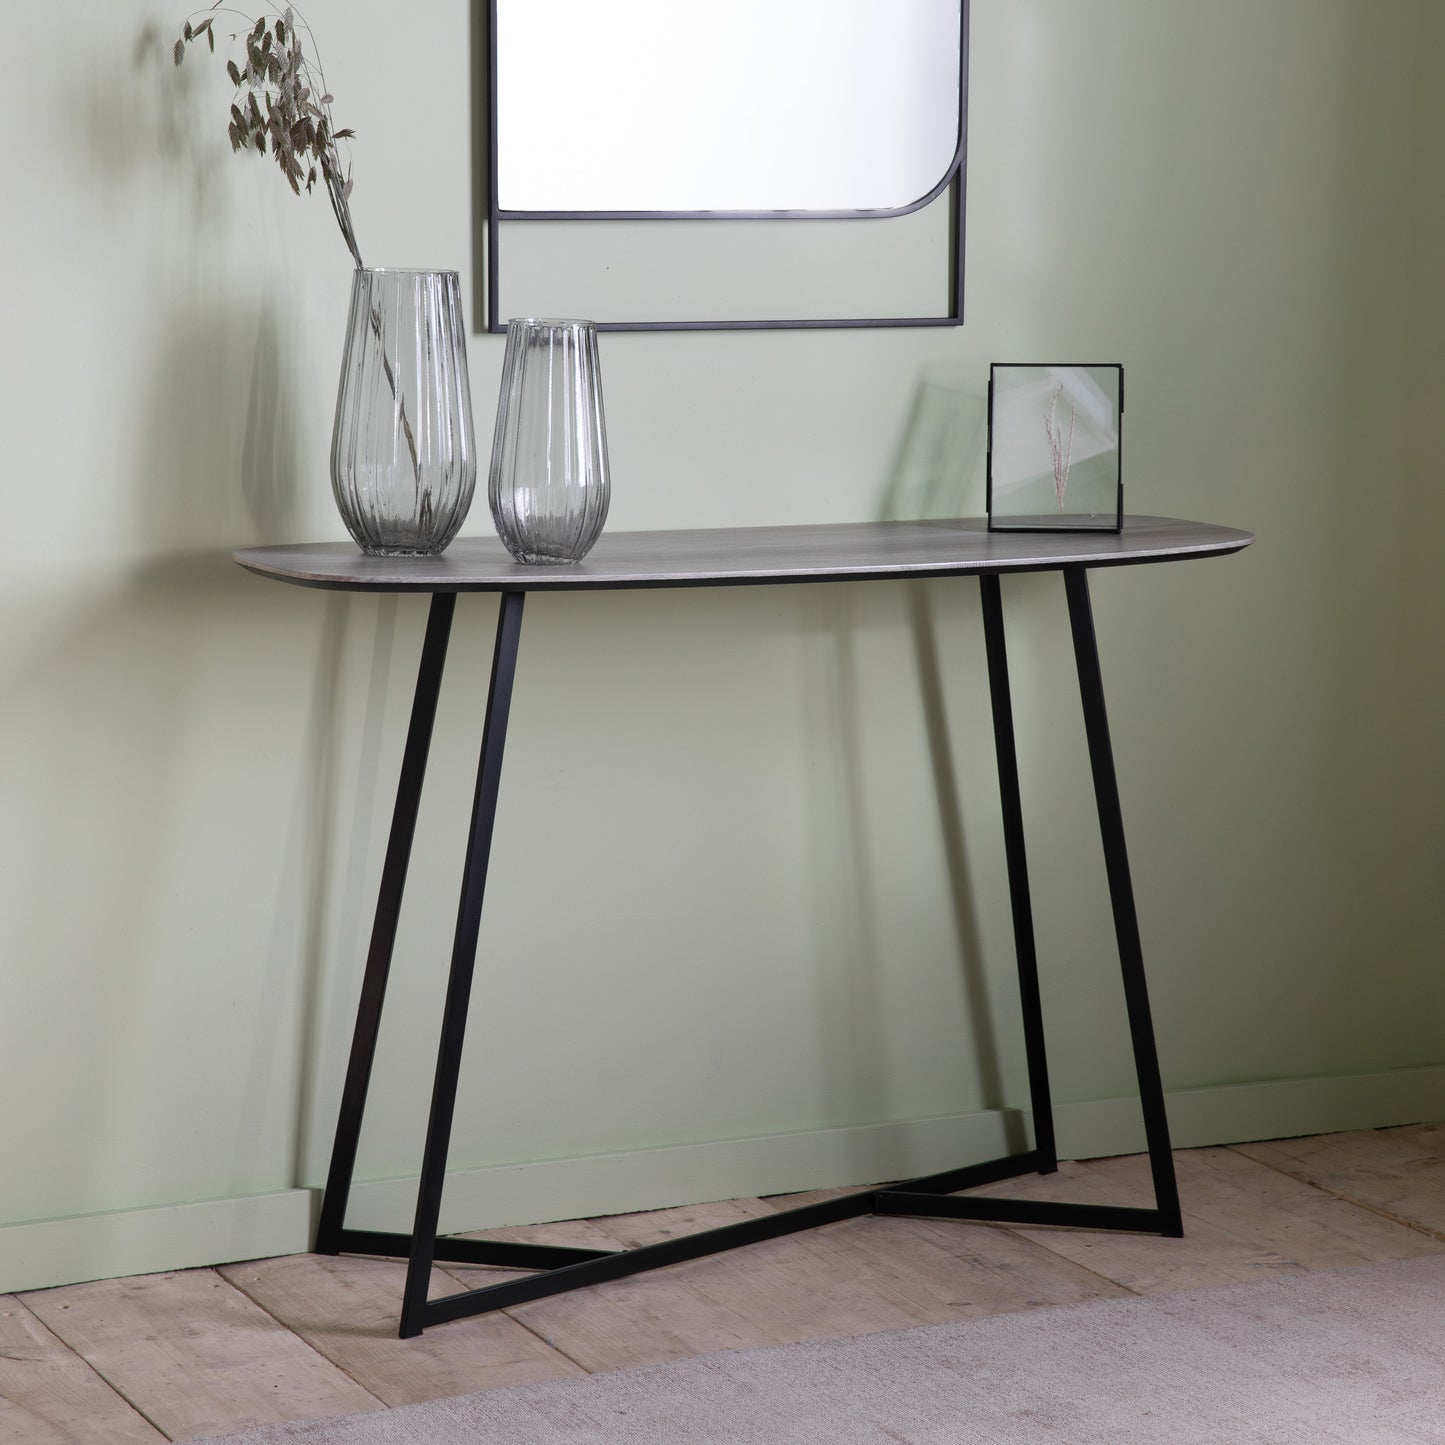 A Finsbury Console Table Oak Effect 1200x400x800mm with a mirror and vases for interior decor.